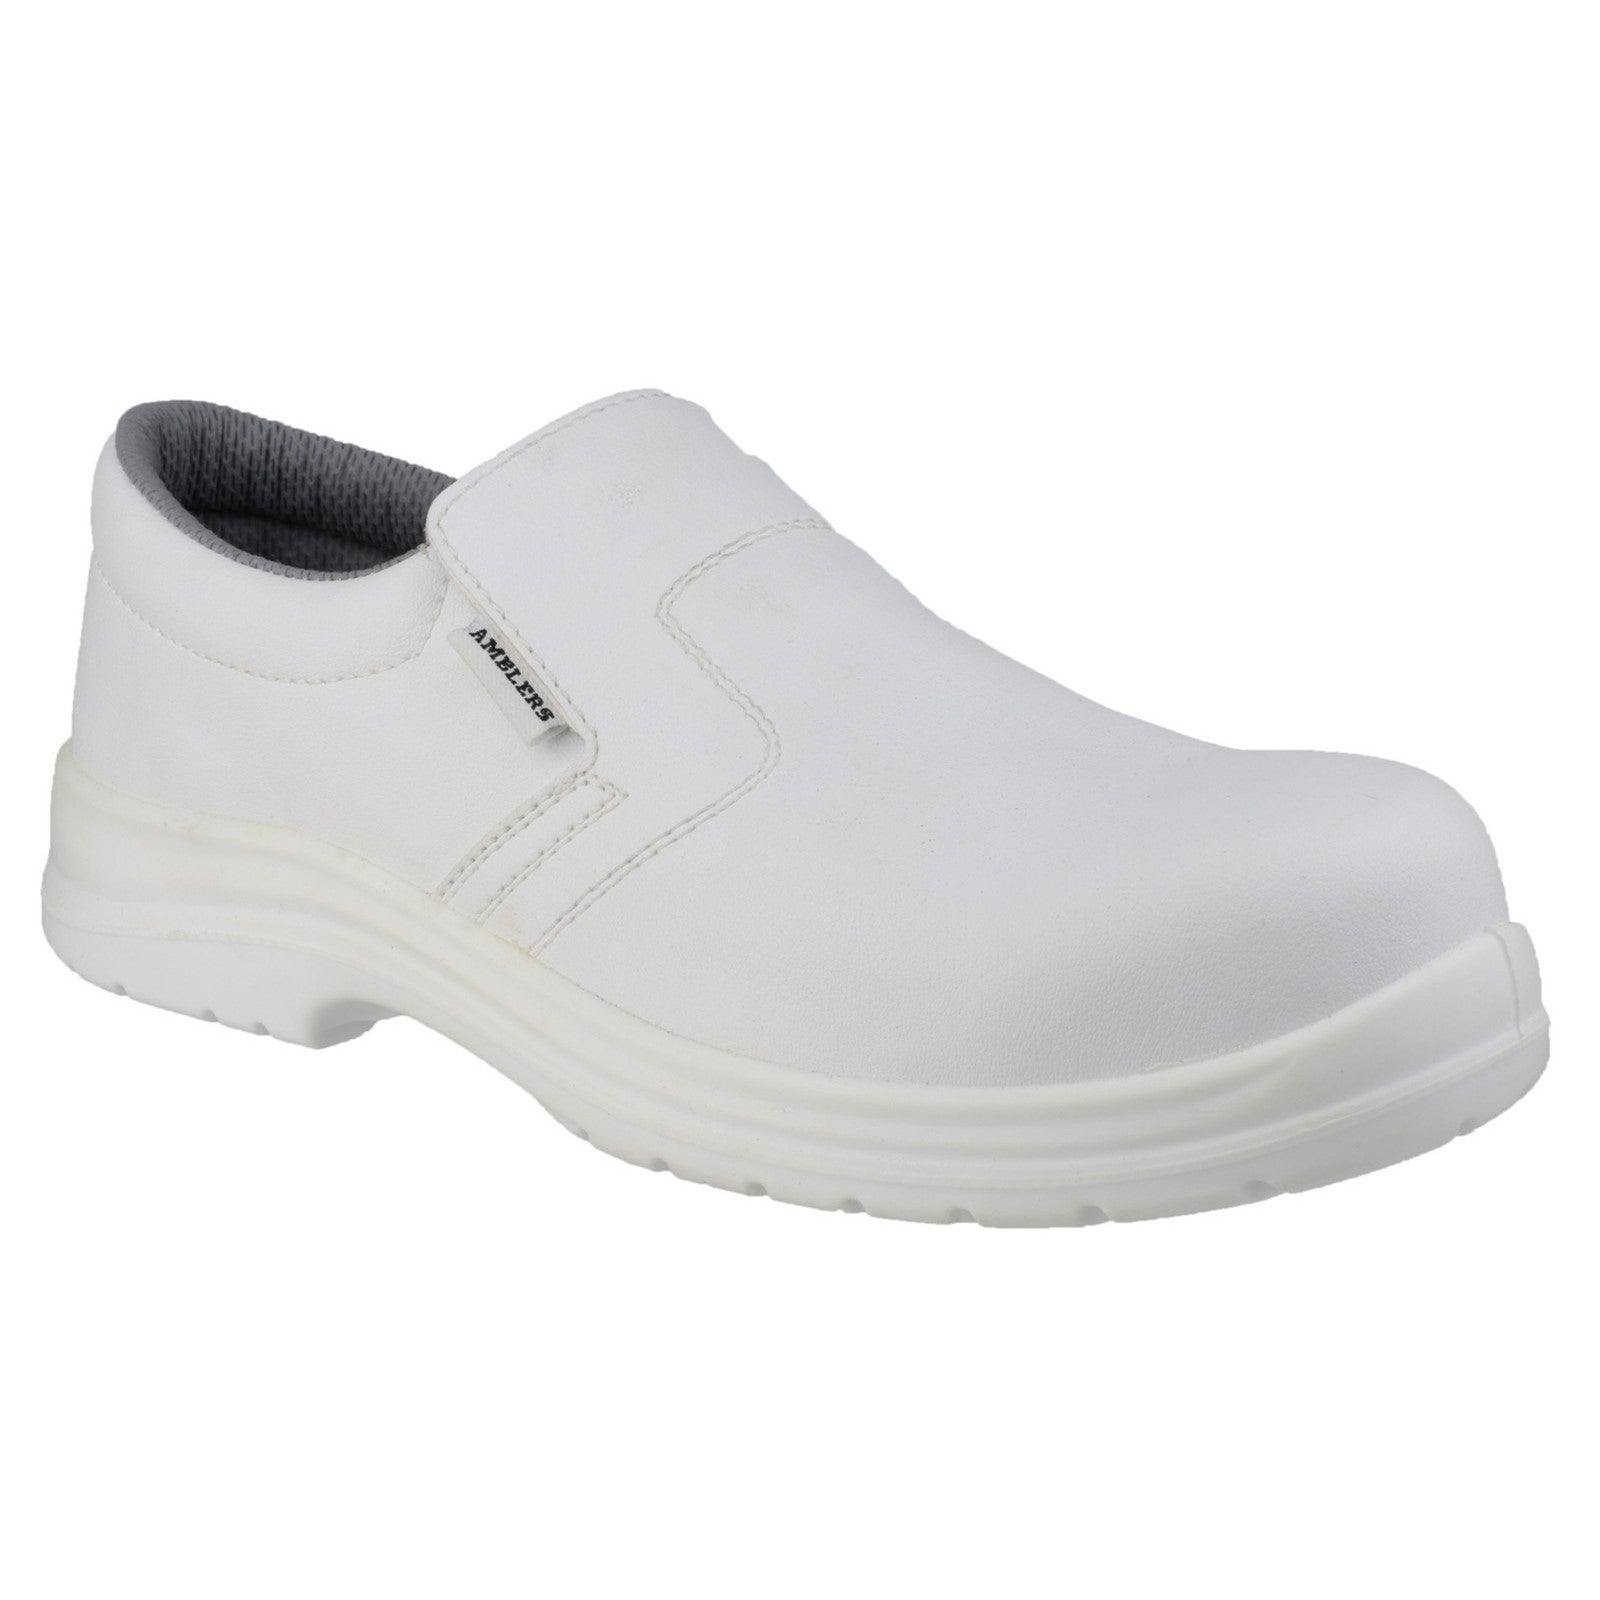 Amblers Safety FS510 Metal-Free Water-Resistant Slip on Safety Shoe